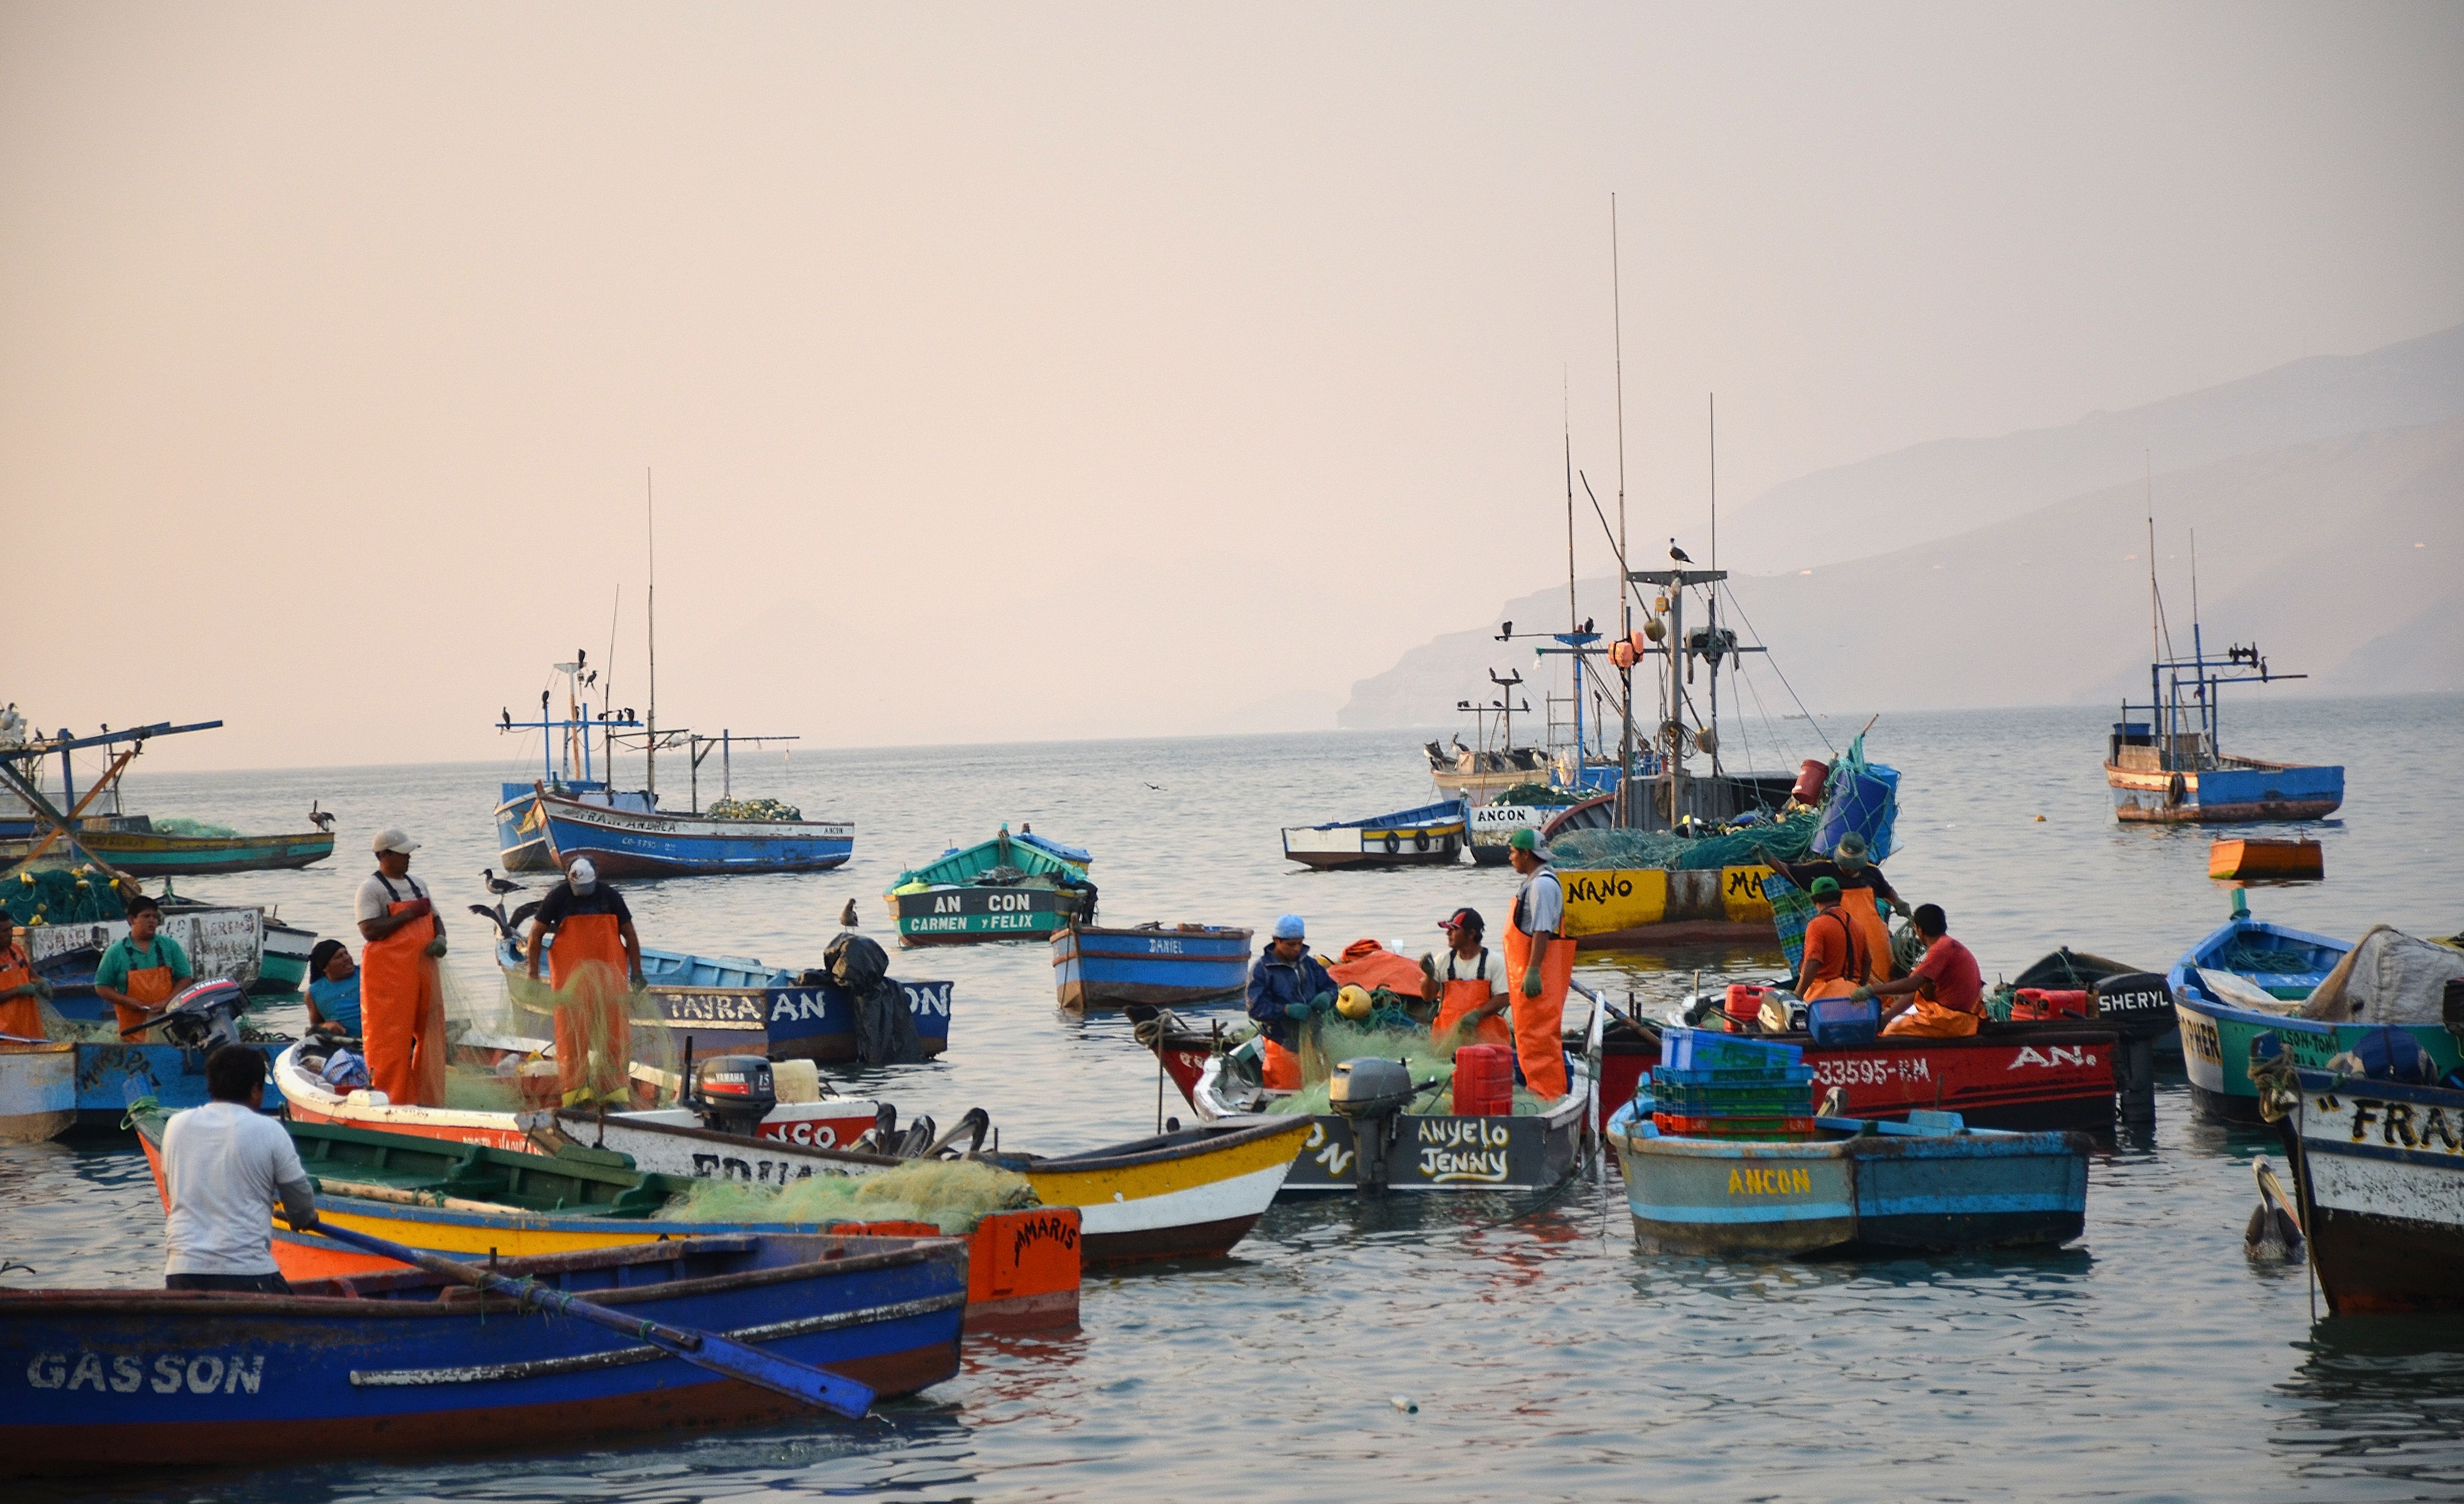 Several small fishing boats with fishers crowded in the water.